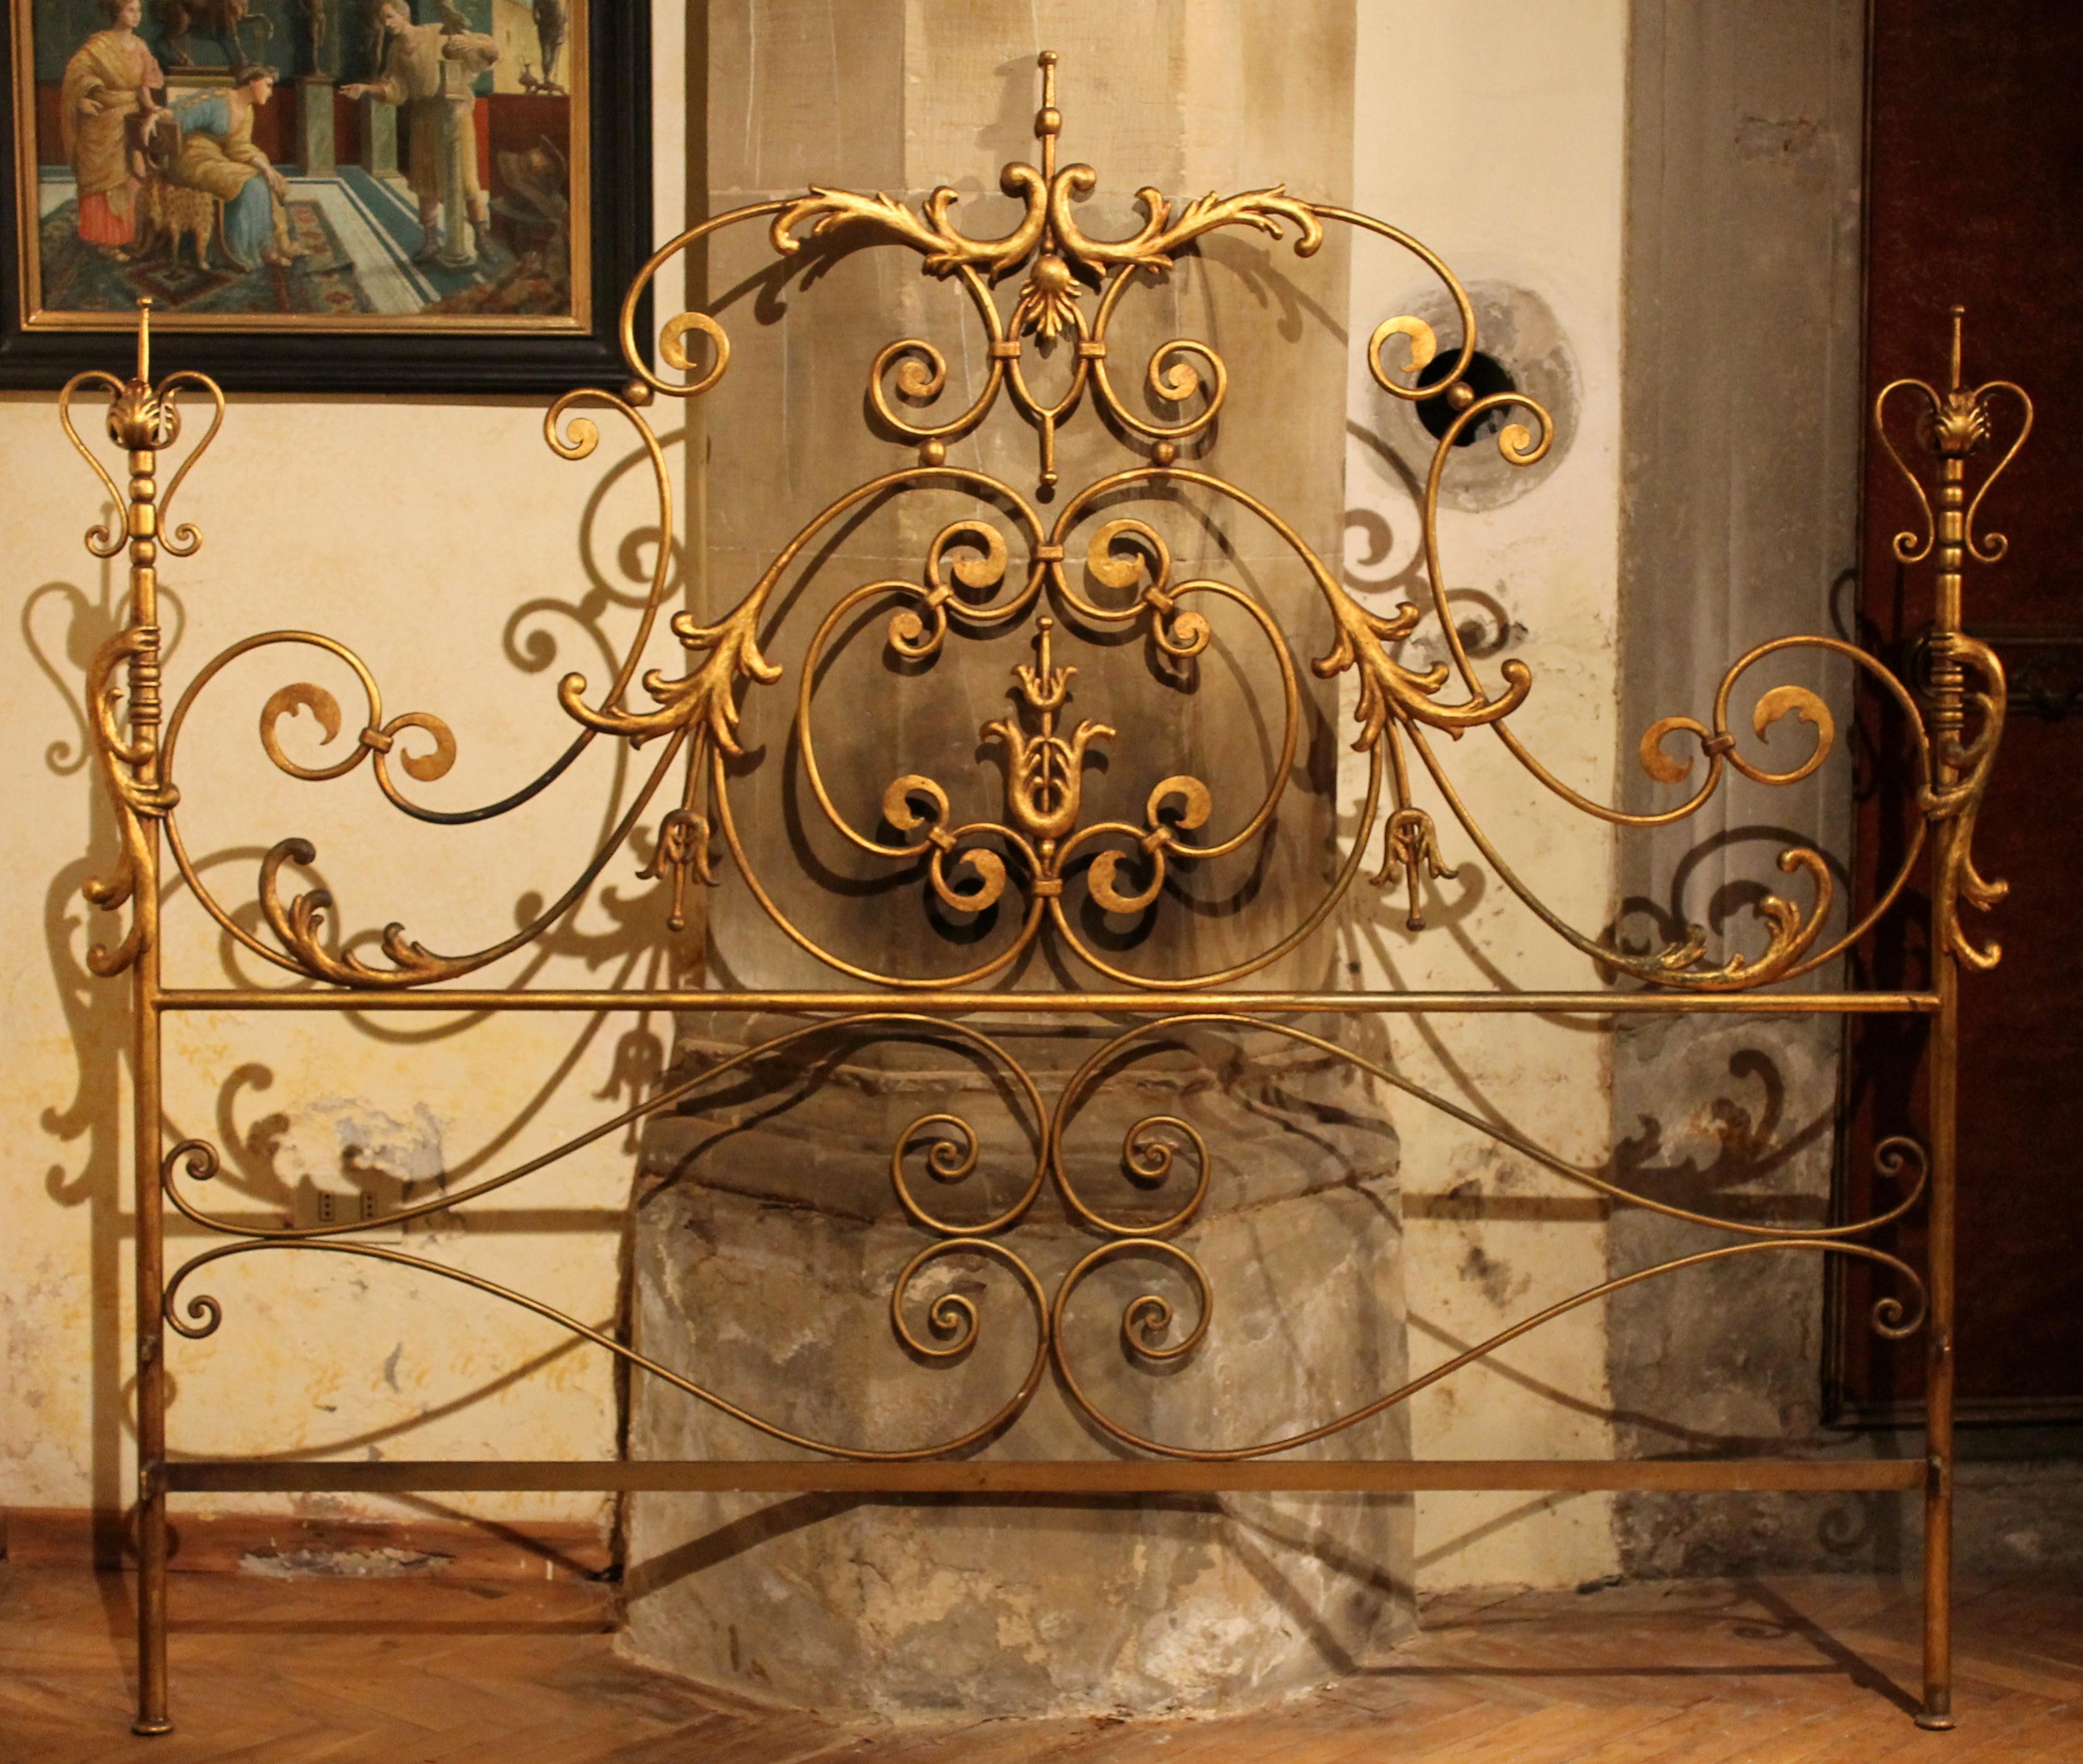 The mastery of Florentine craftsmanship in the ancient art of working handwrought iron is expressed in this wonderful 19th Century Italian headboard suitable for king size bed or double bed.
This phenomenal hand forged and gilded iron headboard has